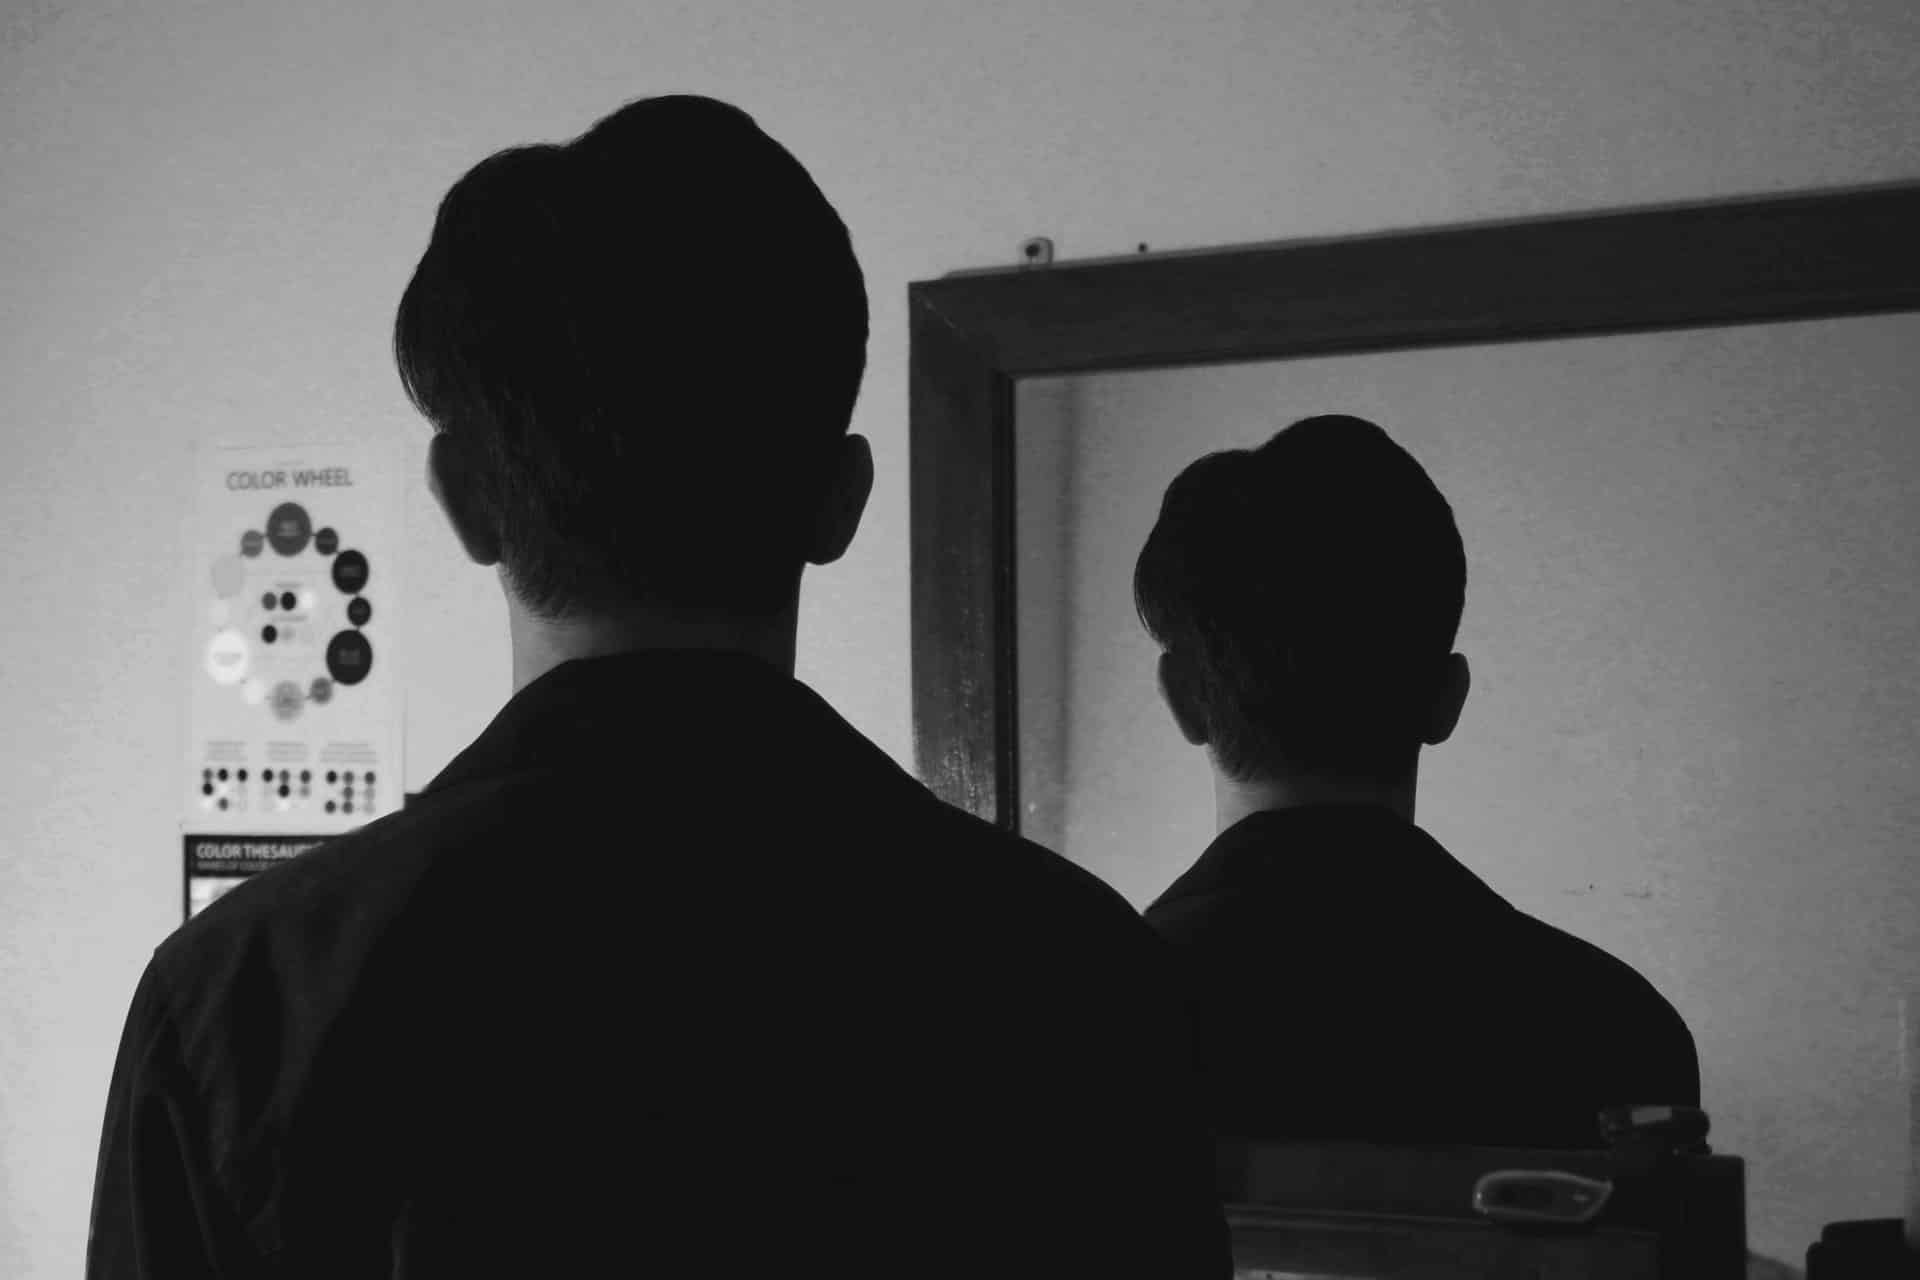 We see a person who stands in front of a mirror. We can only see his back in the picture. Also, the reflection in the mirror shows his back. What are the personality traits of this person?